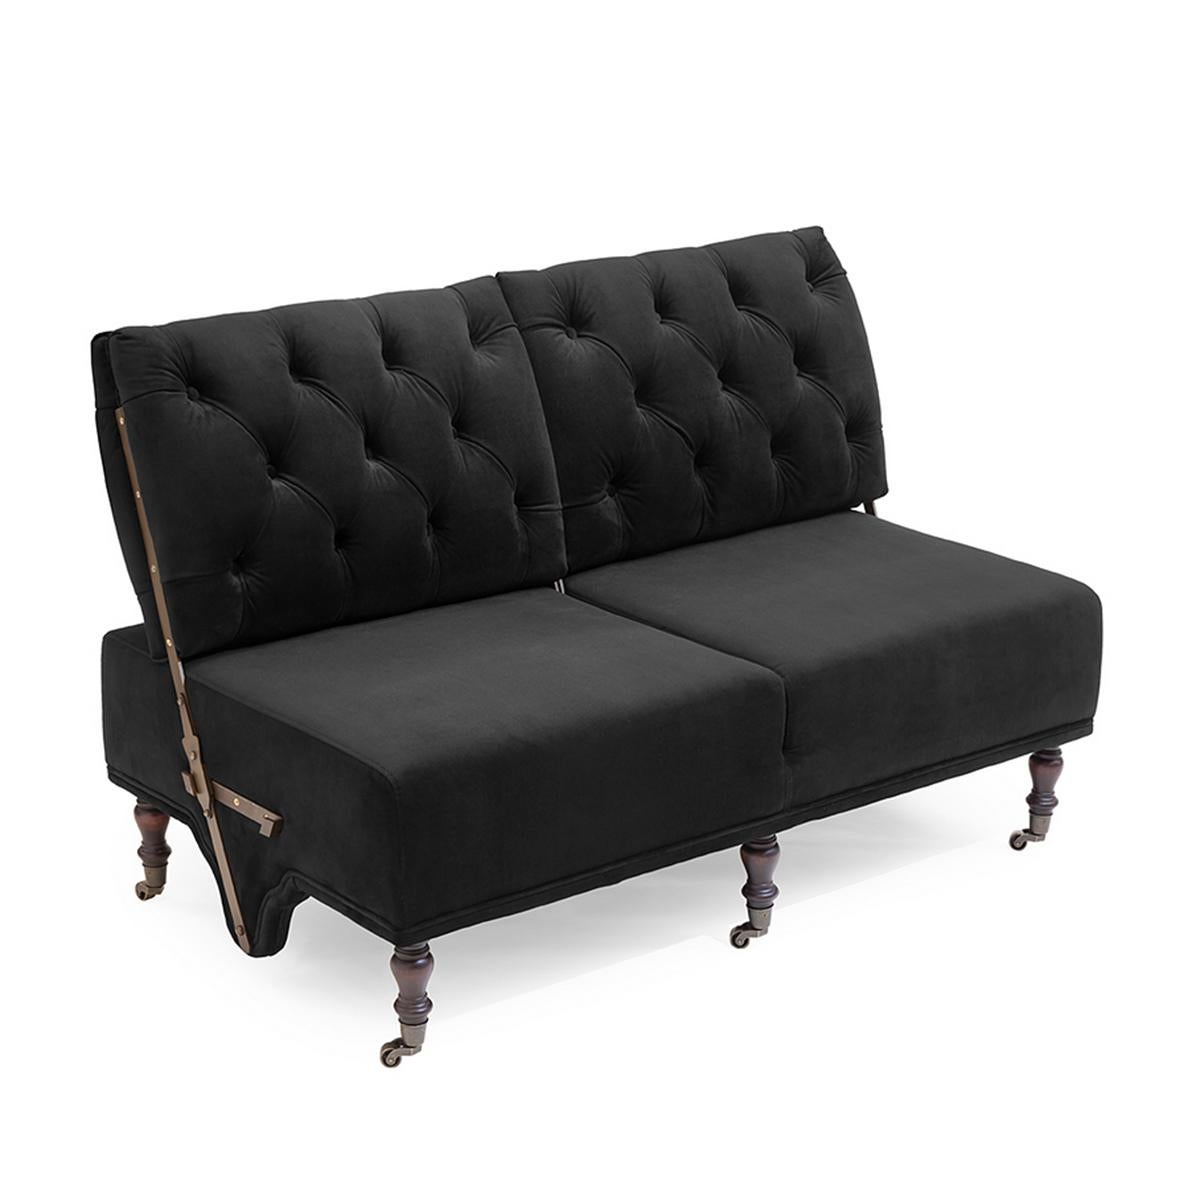 Sofa retro reverse with solid wood structure,
upholstered and covered with black velvet fabric.
Legs and details in metal in bronze finish.
Also available with mustard velvet fabric, or light
pink velvet fabric, or white velvet fabric.